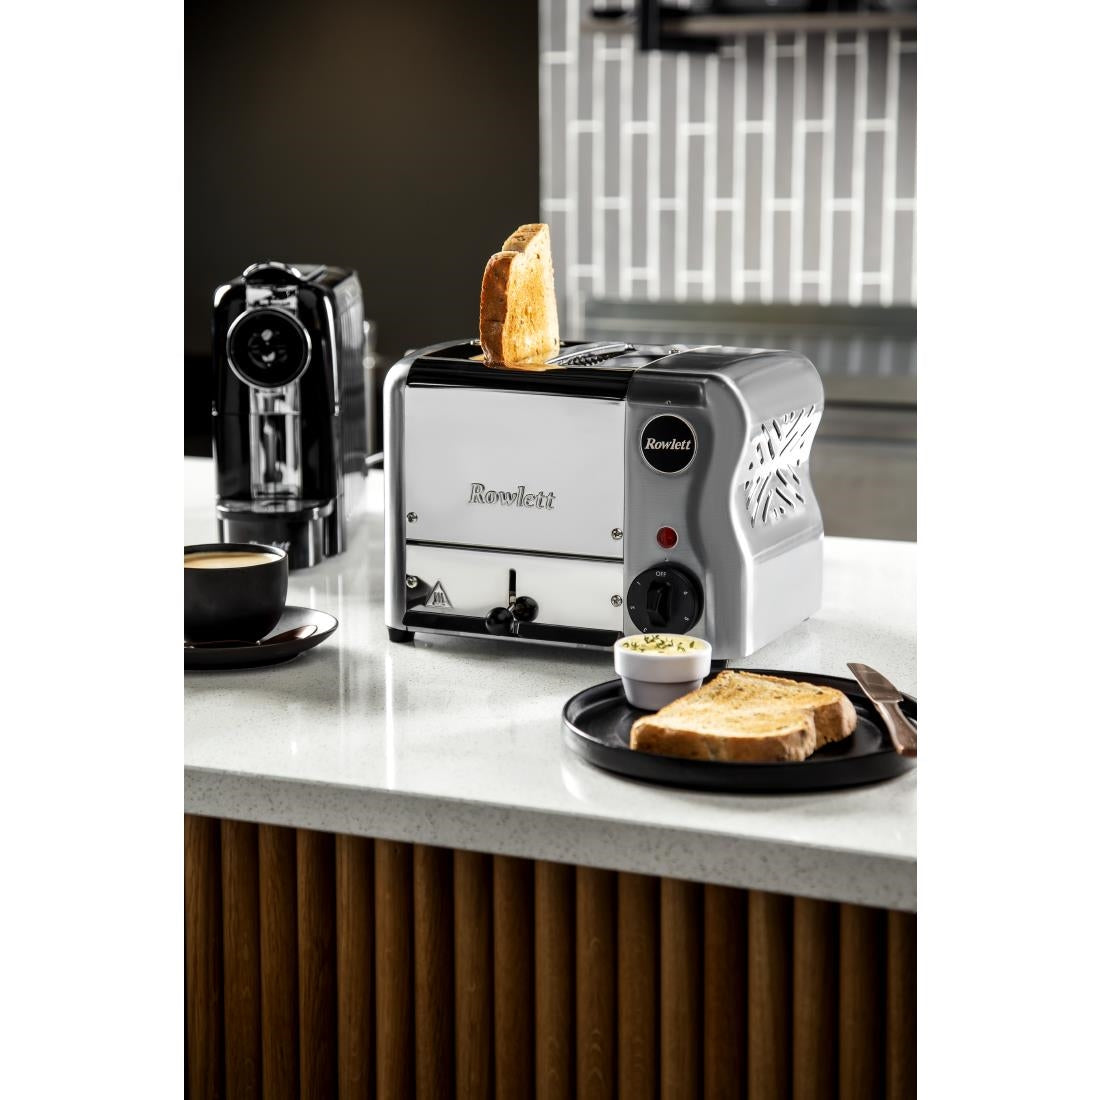 CH177 Rowlett Esprit 2 Slot Toaster Chrome w/2 x Additional Elements & Sandwich Cage JD Catering Equipment Solutions Ltd